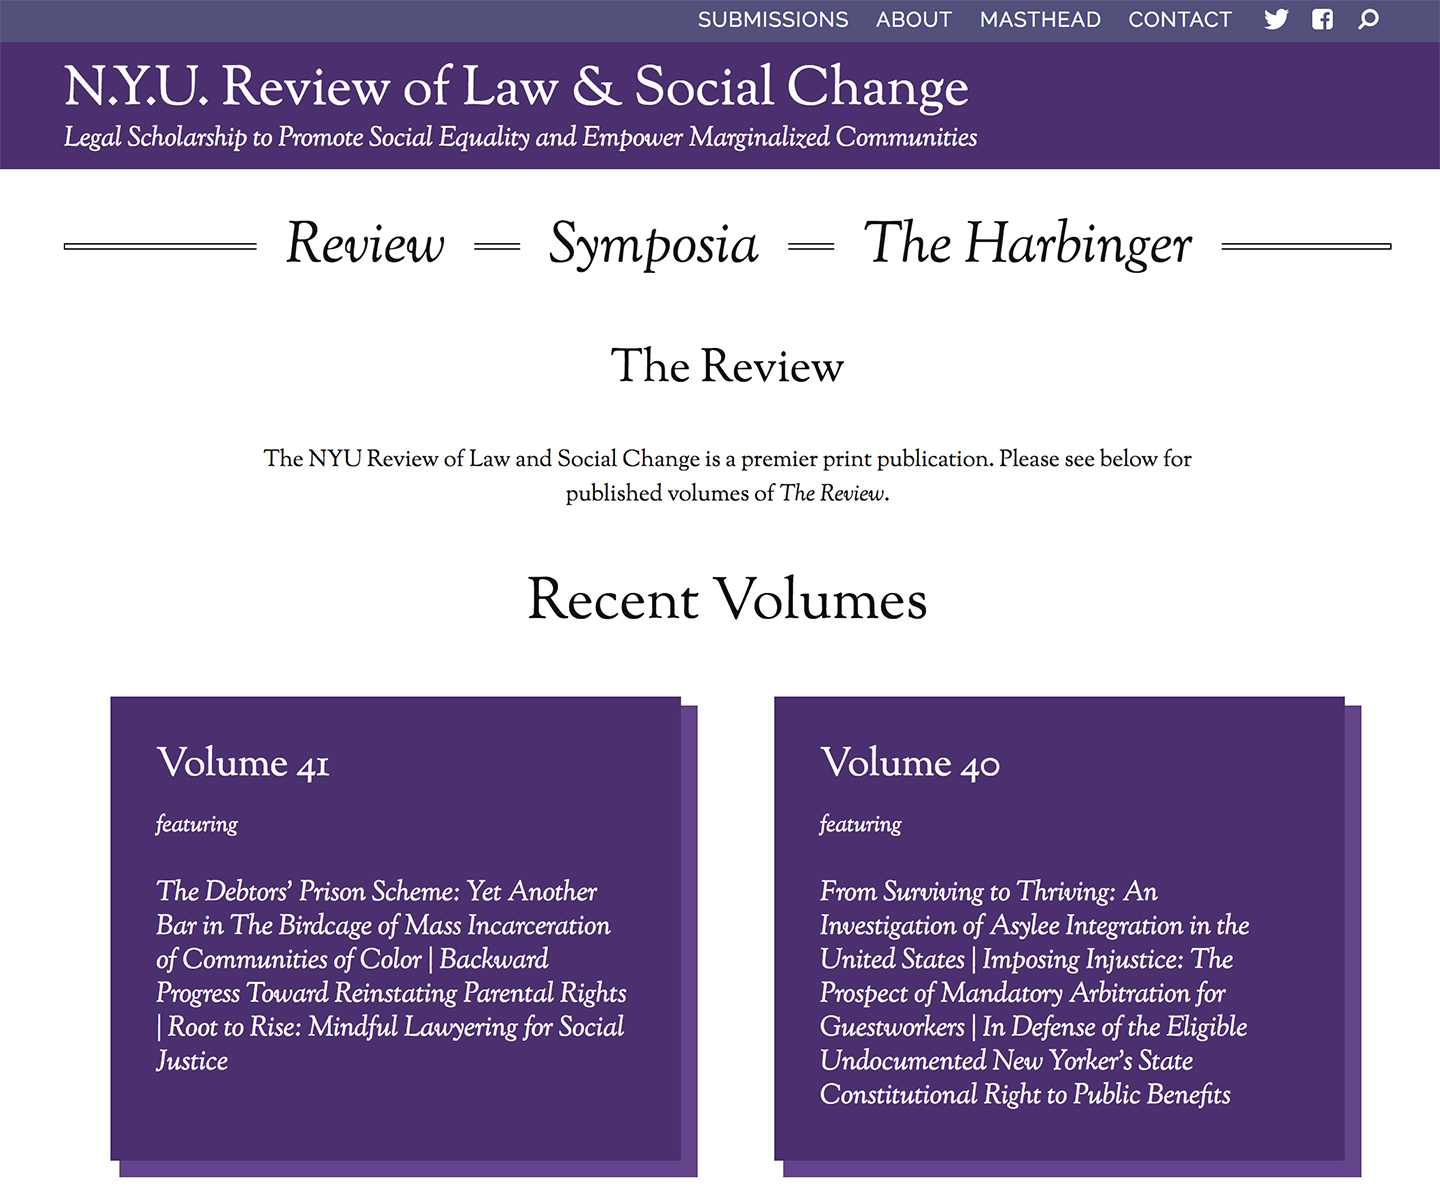 NYU: Review of Law and Social Change: Journal Overview